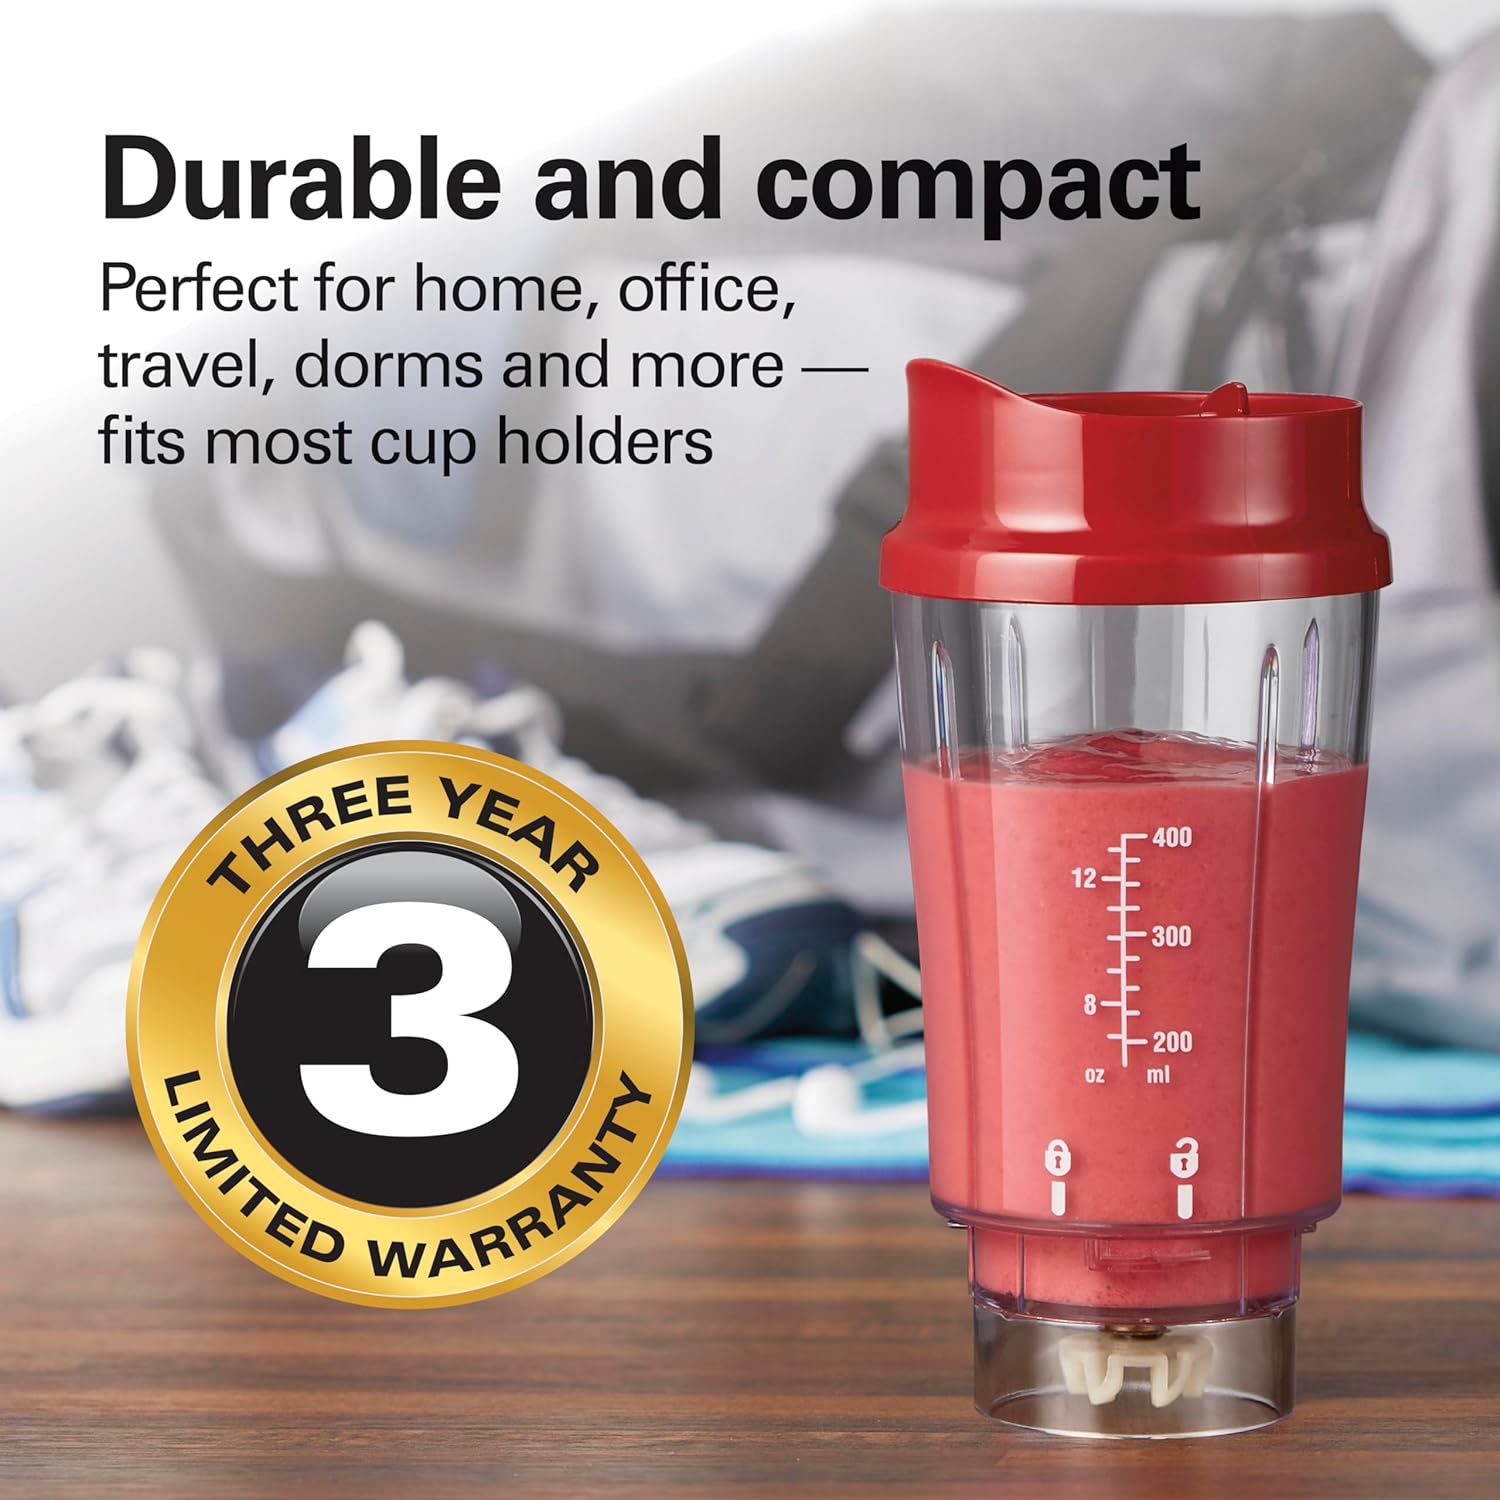 Hamilton Beach Personal Creations Single-Serve Blender + Travel Cup – Red